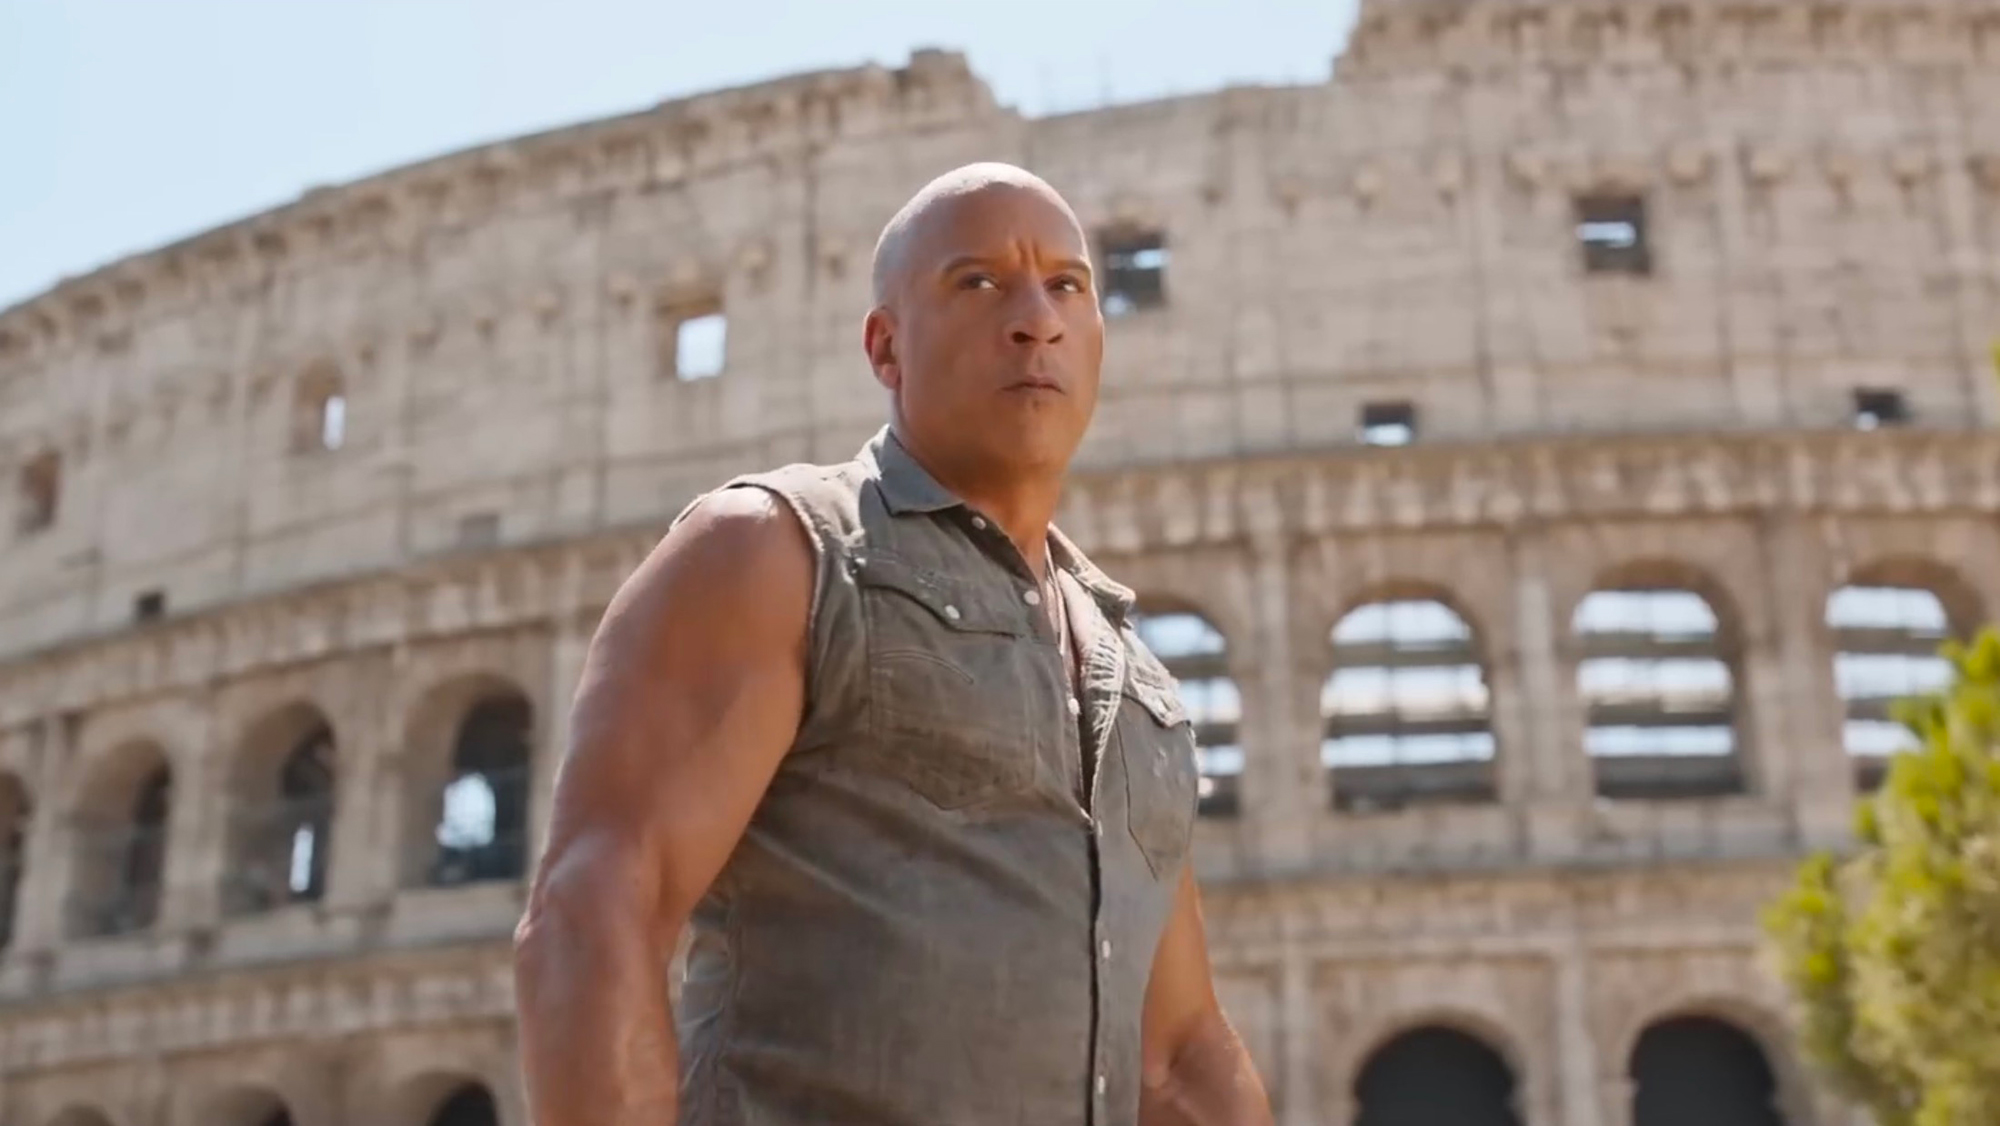 Vin Diesel Workout Routine and Diet Plan: Train like Dominic Toretto